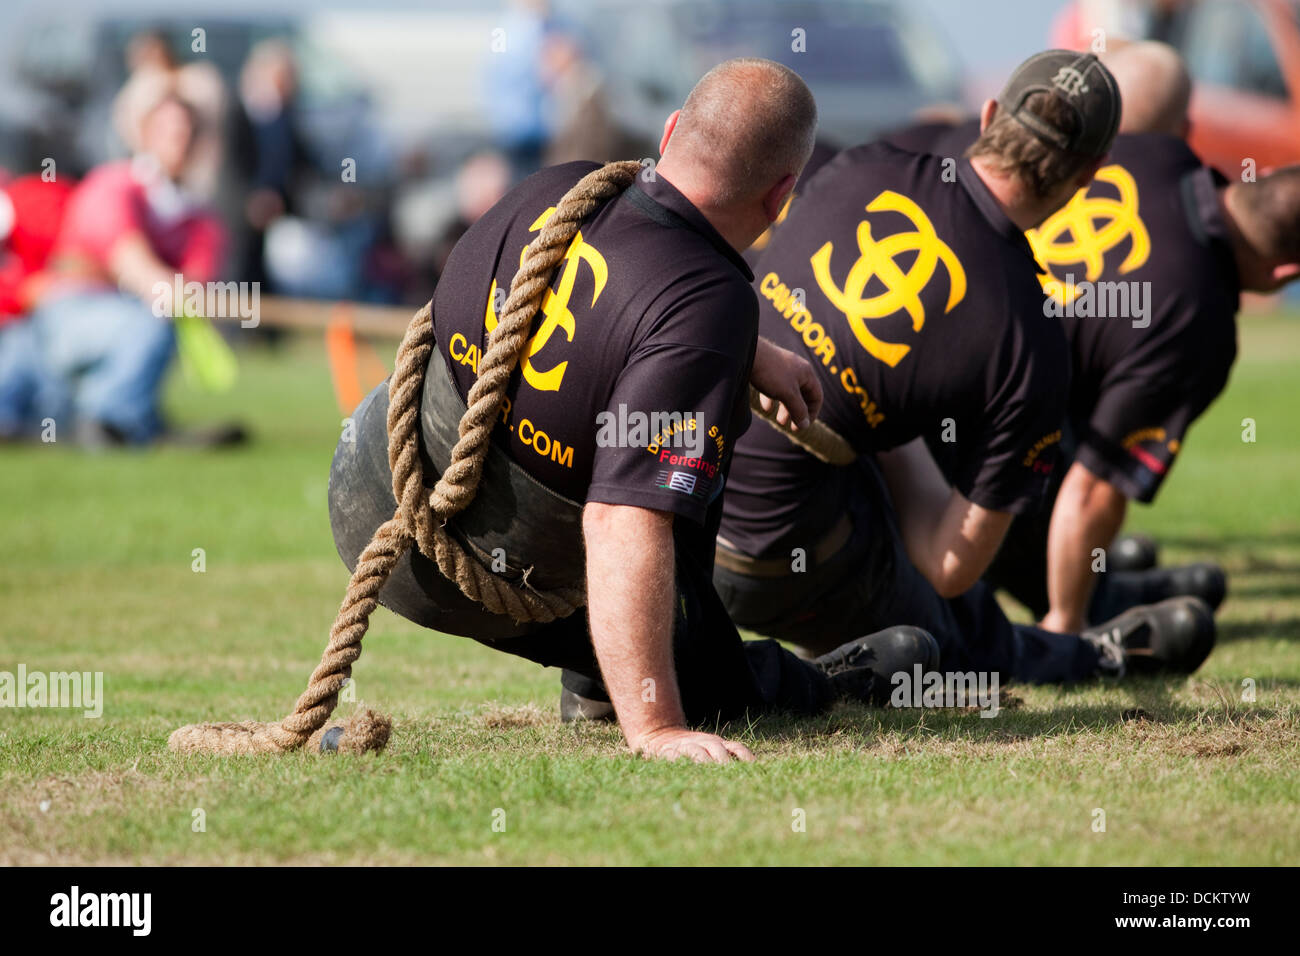 Nairn, Scotland - August 17th, 2013: A tug of war contest at the Nairn Highland Games Stock Photo